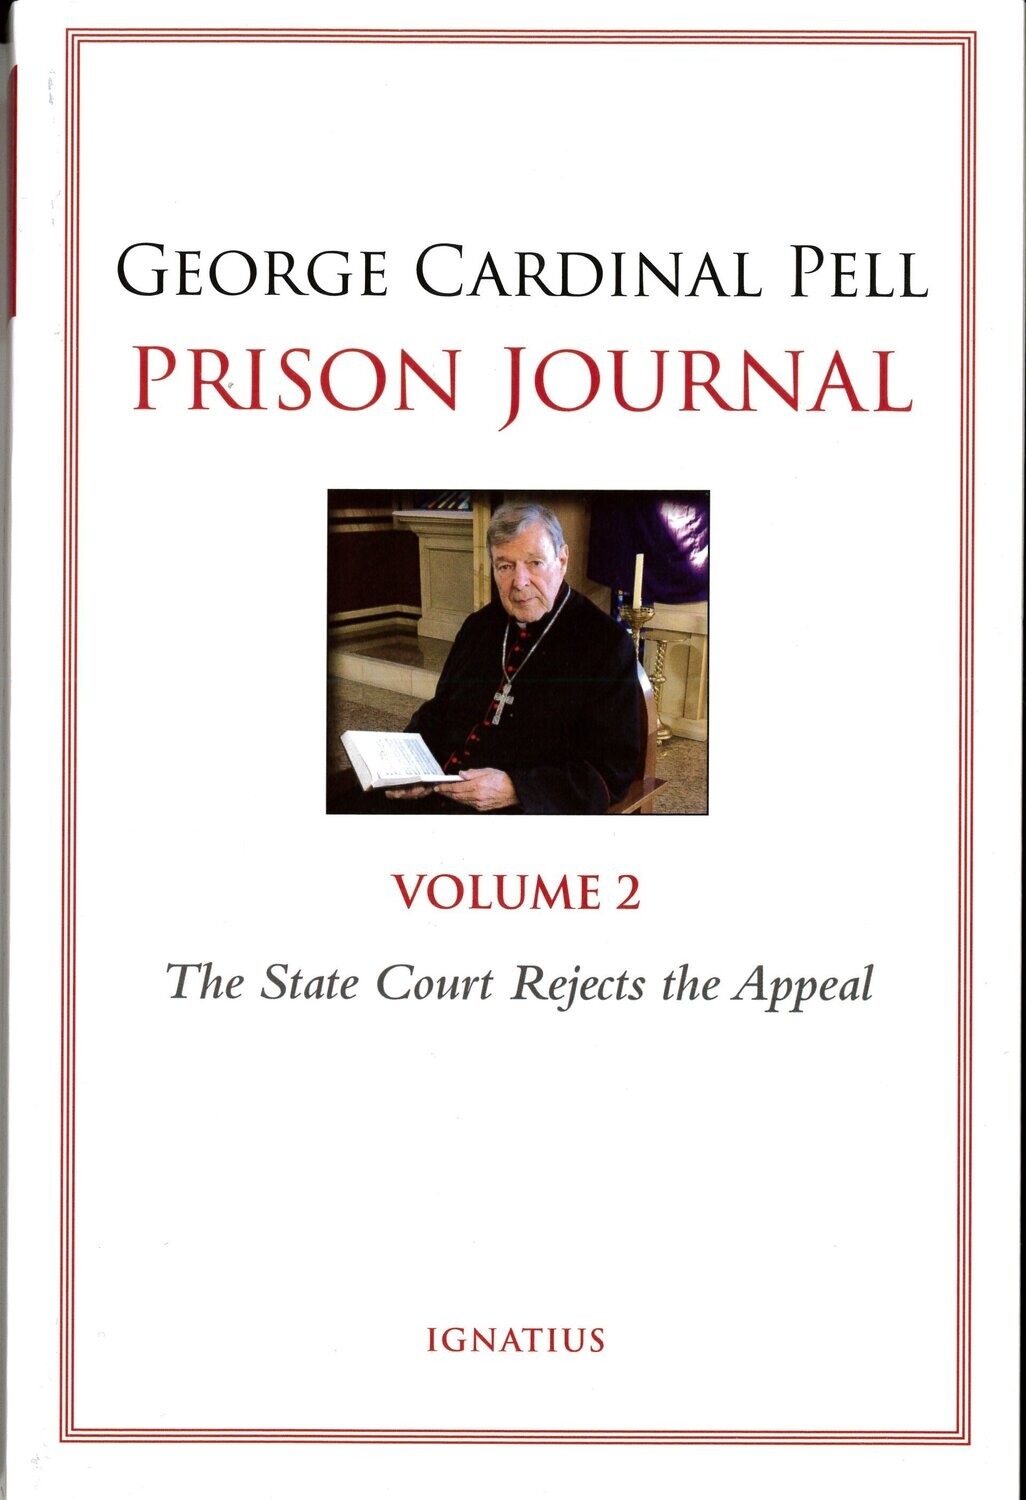 Prison Journal Volume 2: The State Court Rejects the Appeal